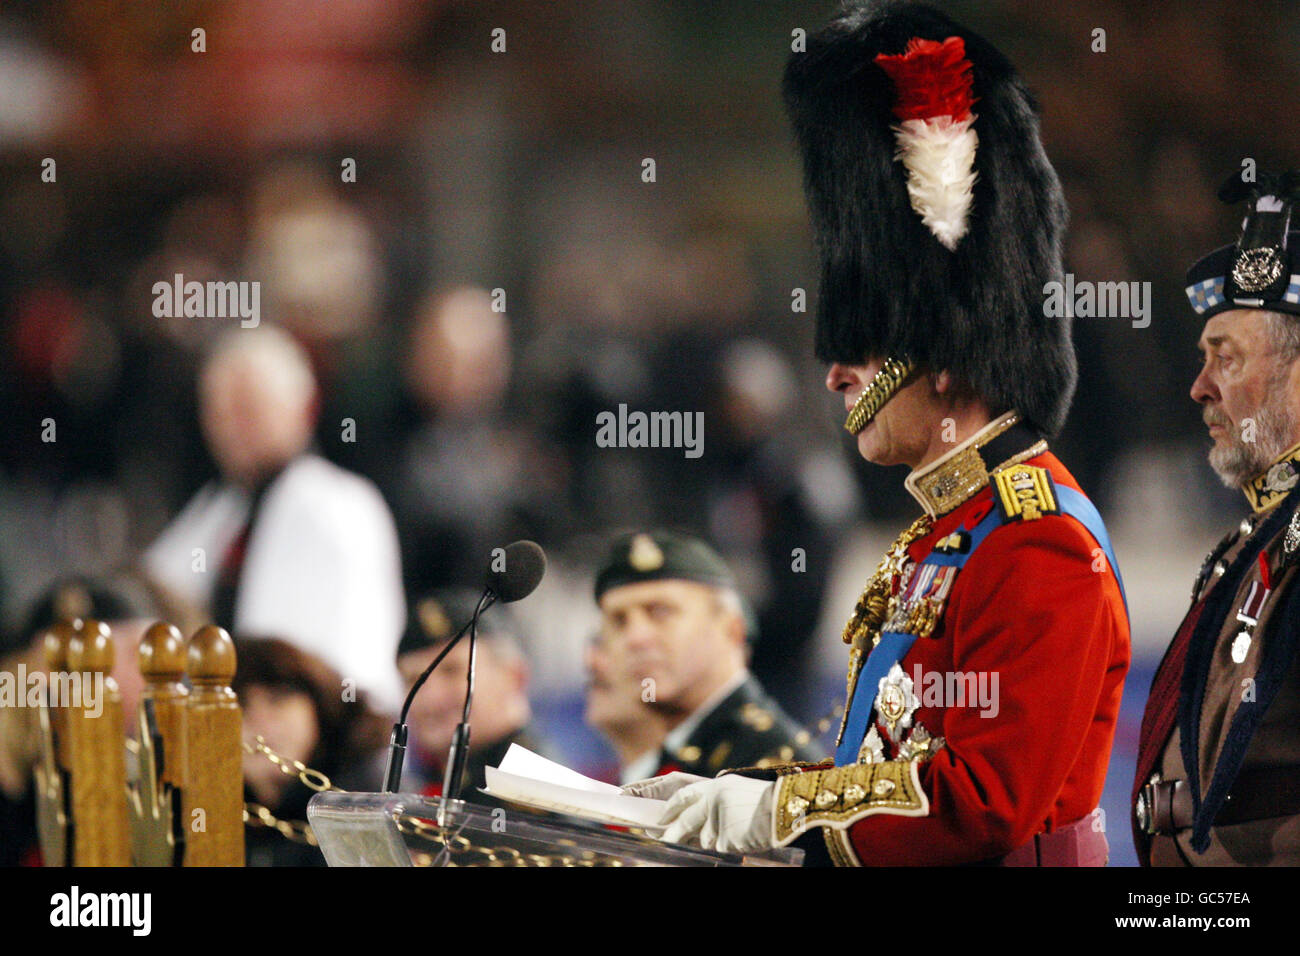 The Prince of Wales at the Varsity Stadium in Toronto, Canada, where he presented the new colours to the Royal Regiment of Canada and the Toronto Scottish Regiment. Stock Photo